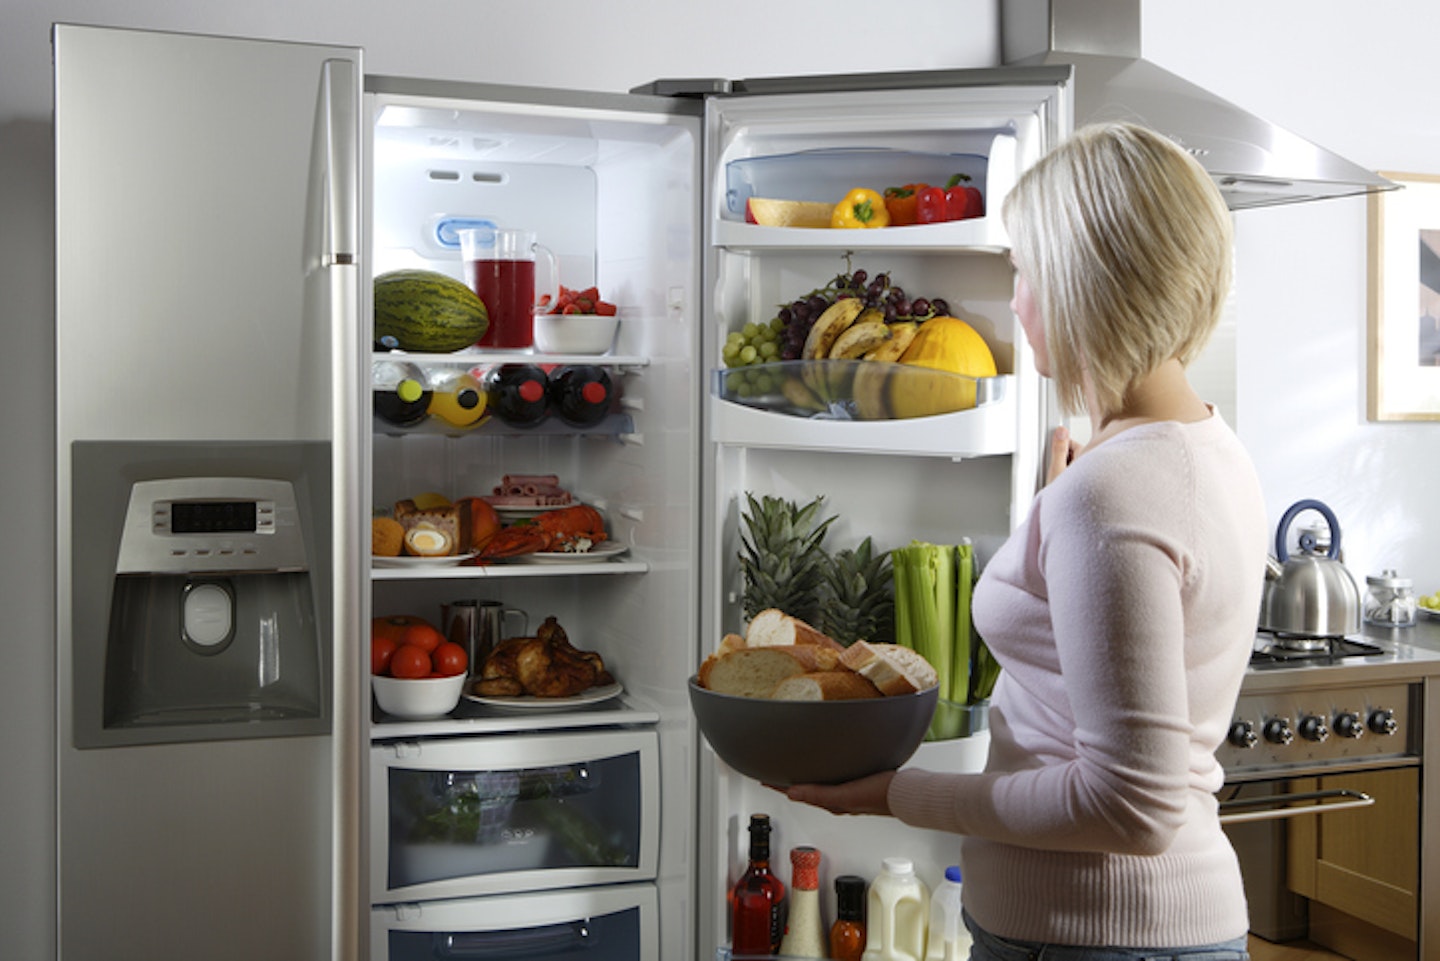 A young woman looking in an open fridge filled with food and drinks in a home kitchen